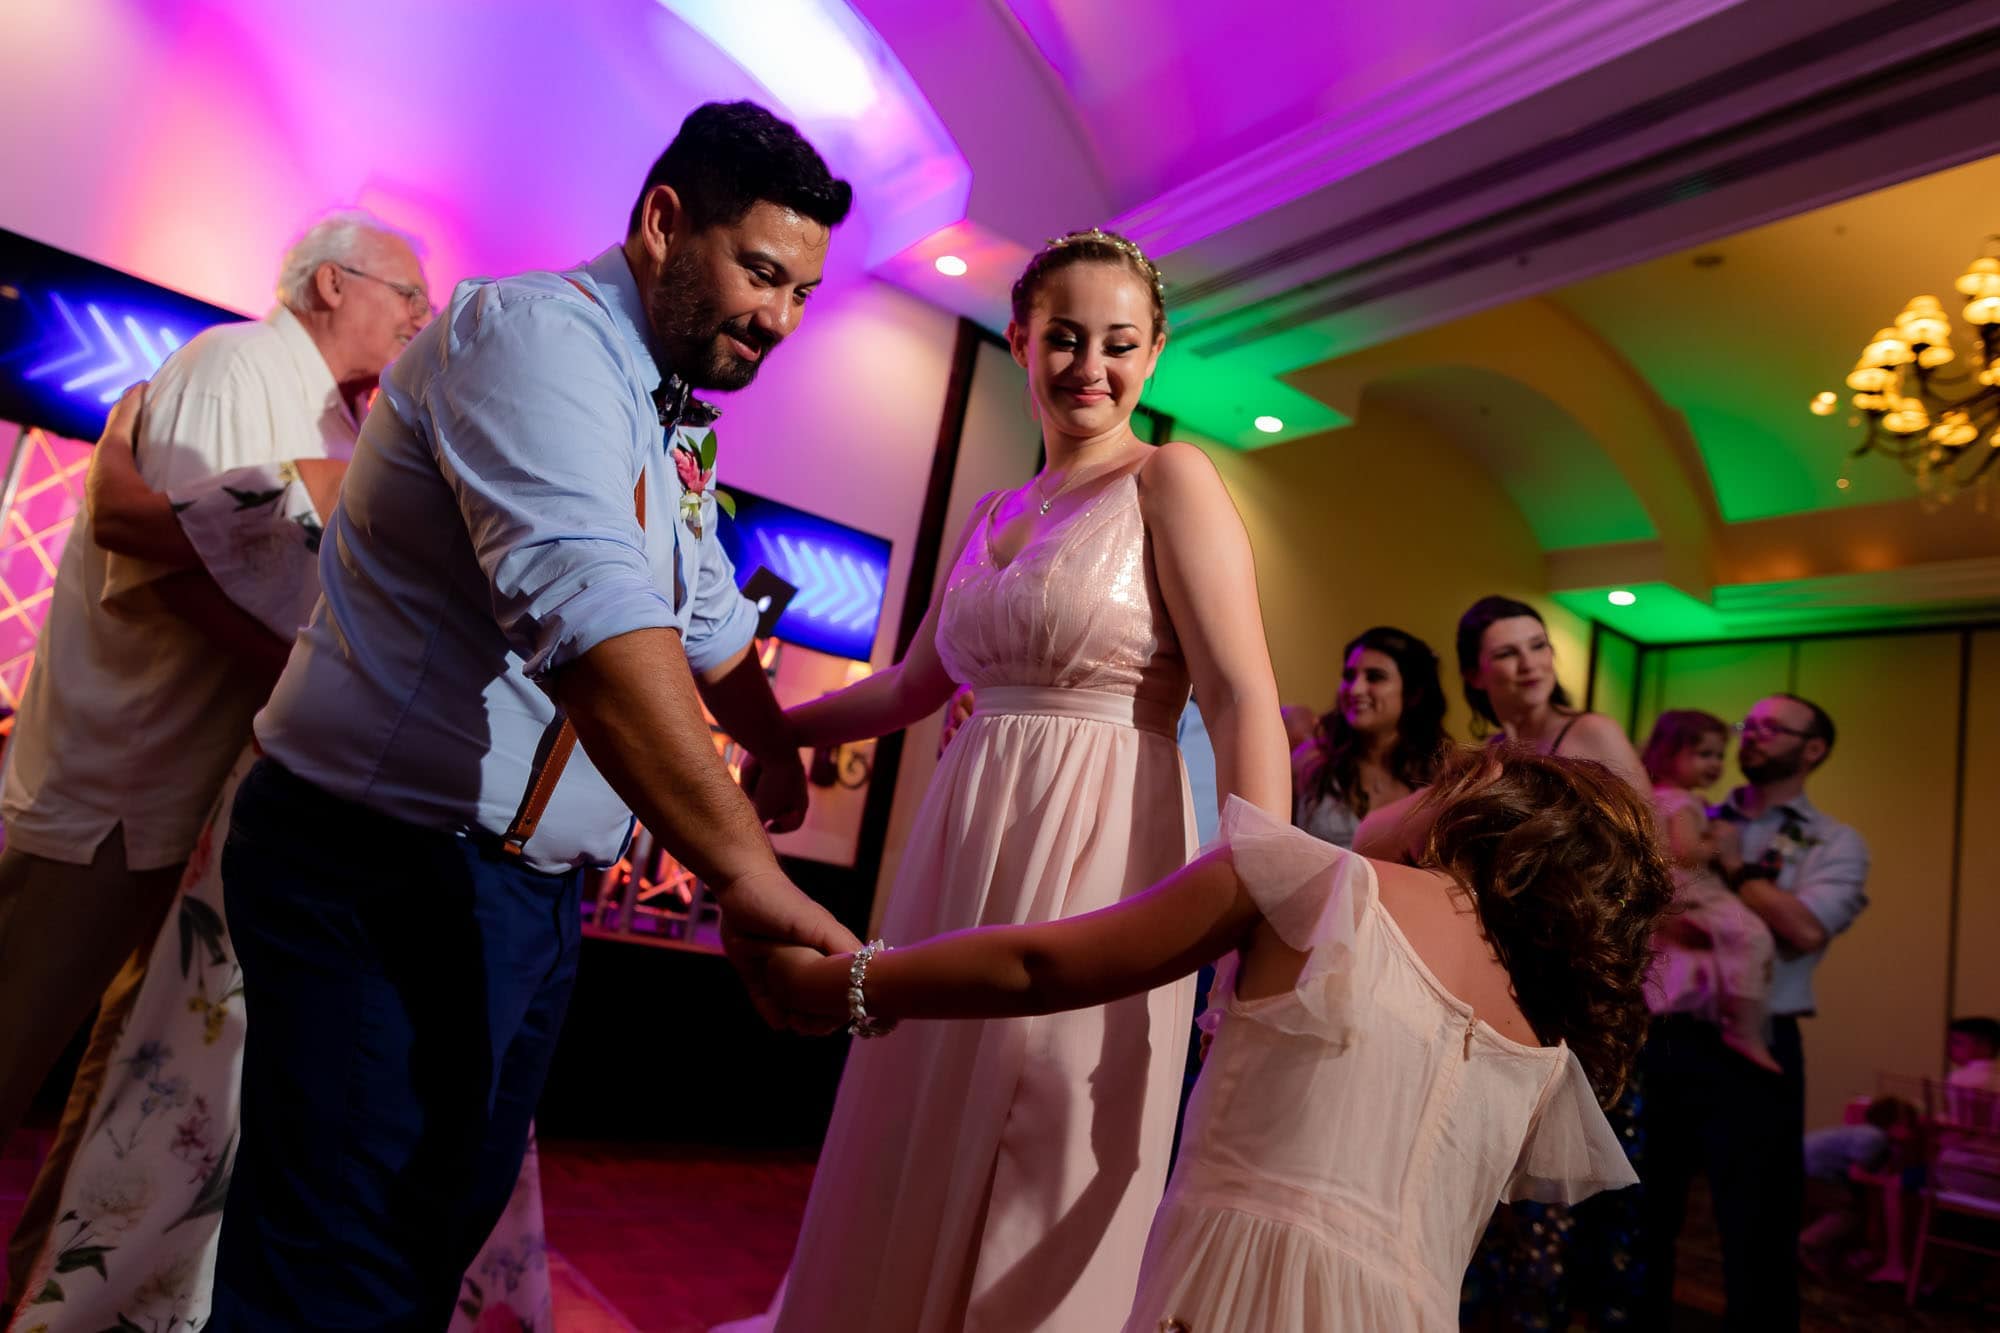 father dancing with daughters at wedding